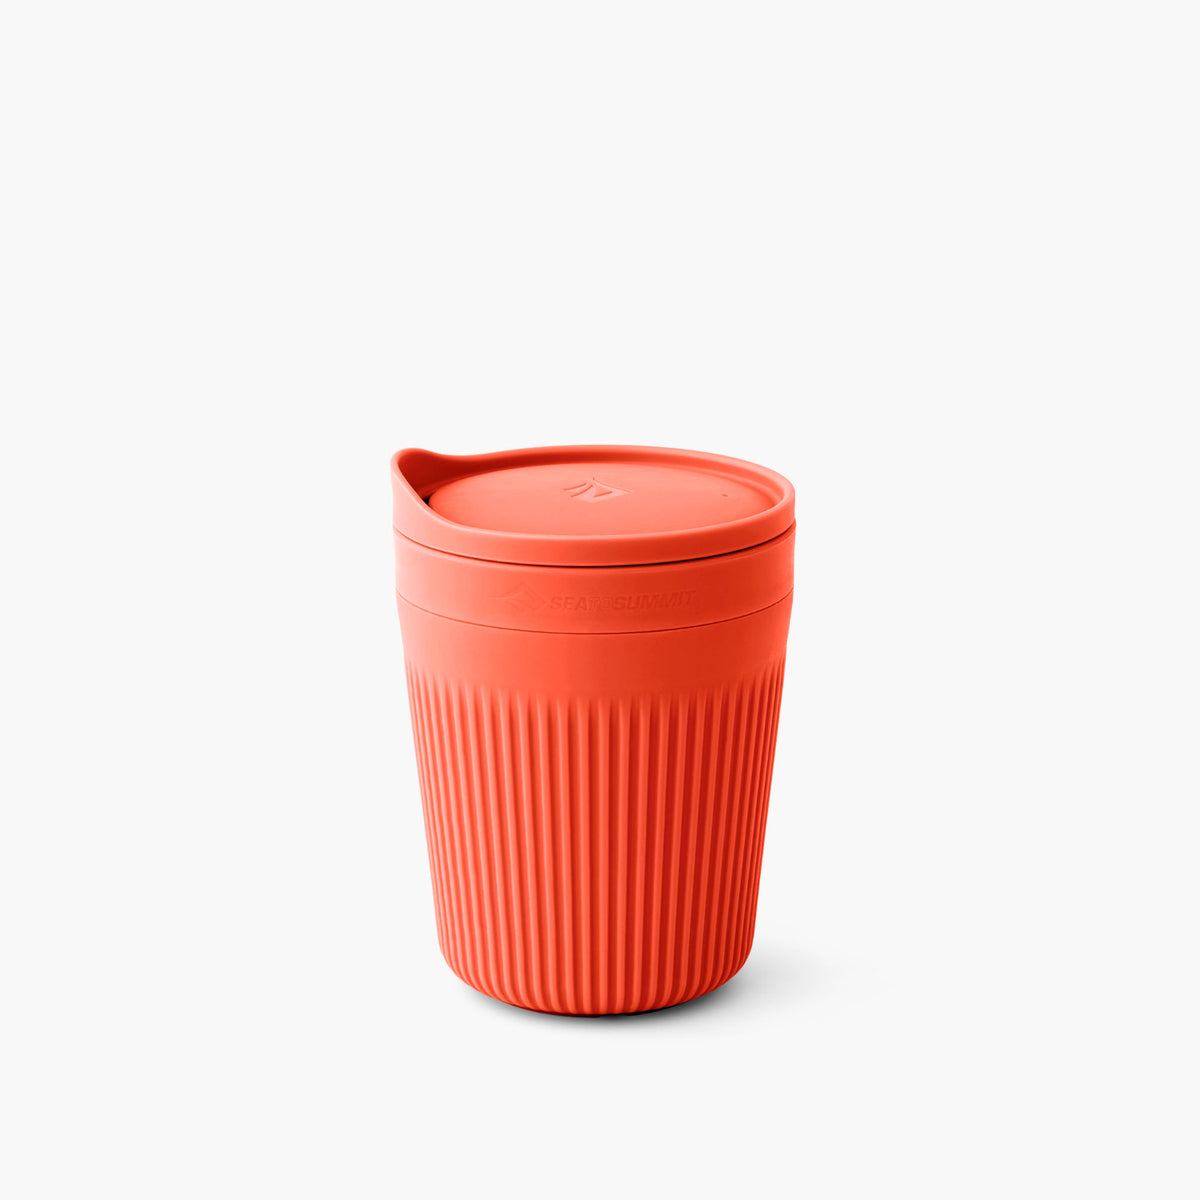 Sea to Summit Passage Insulated Mug in spicy orangee colour